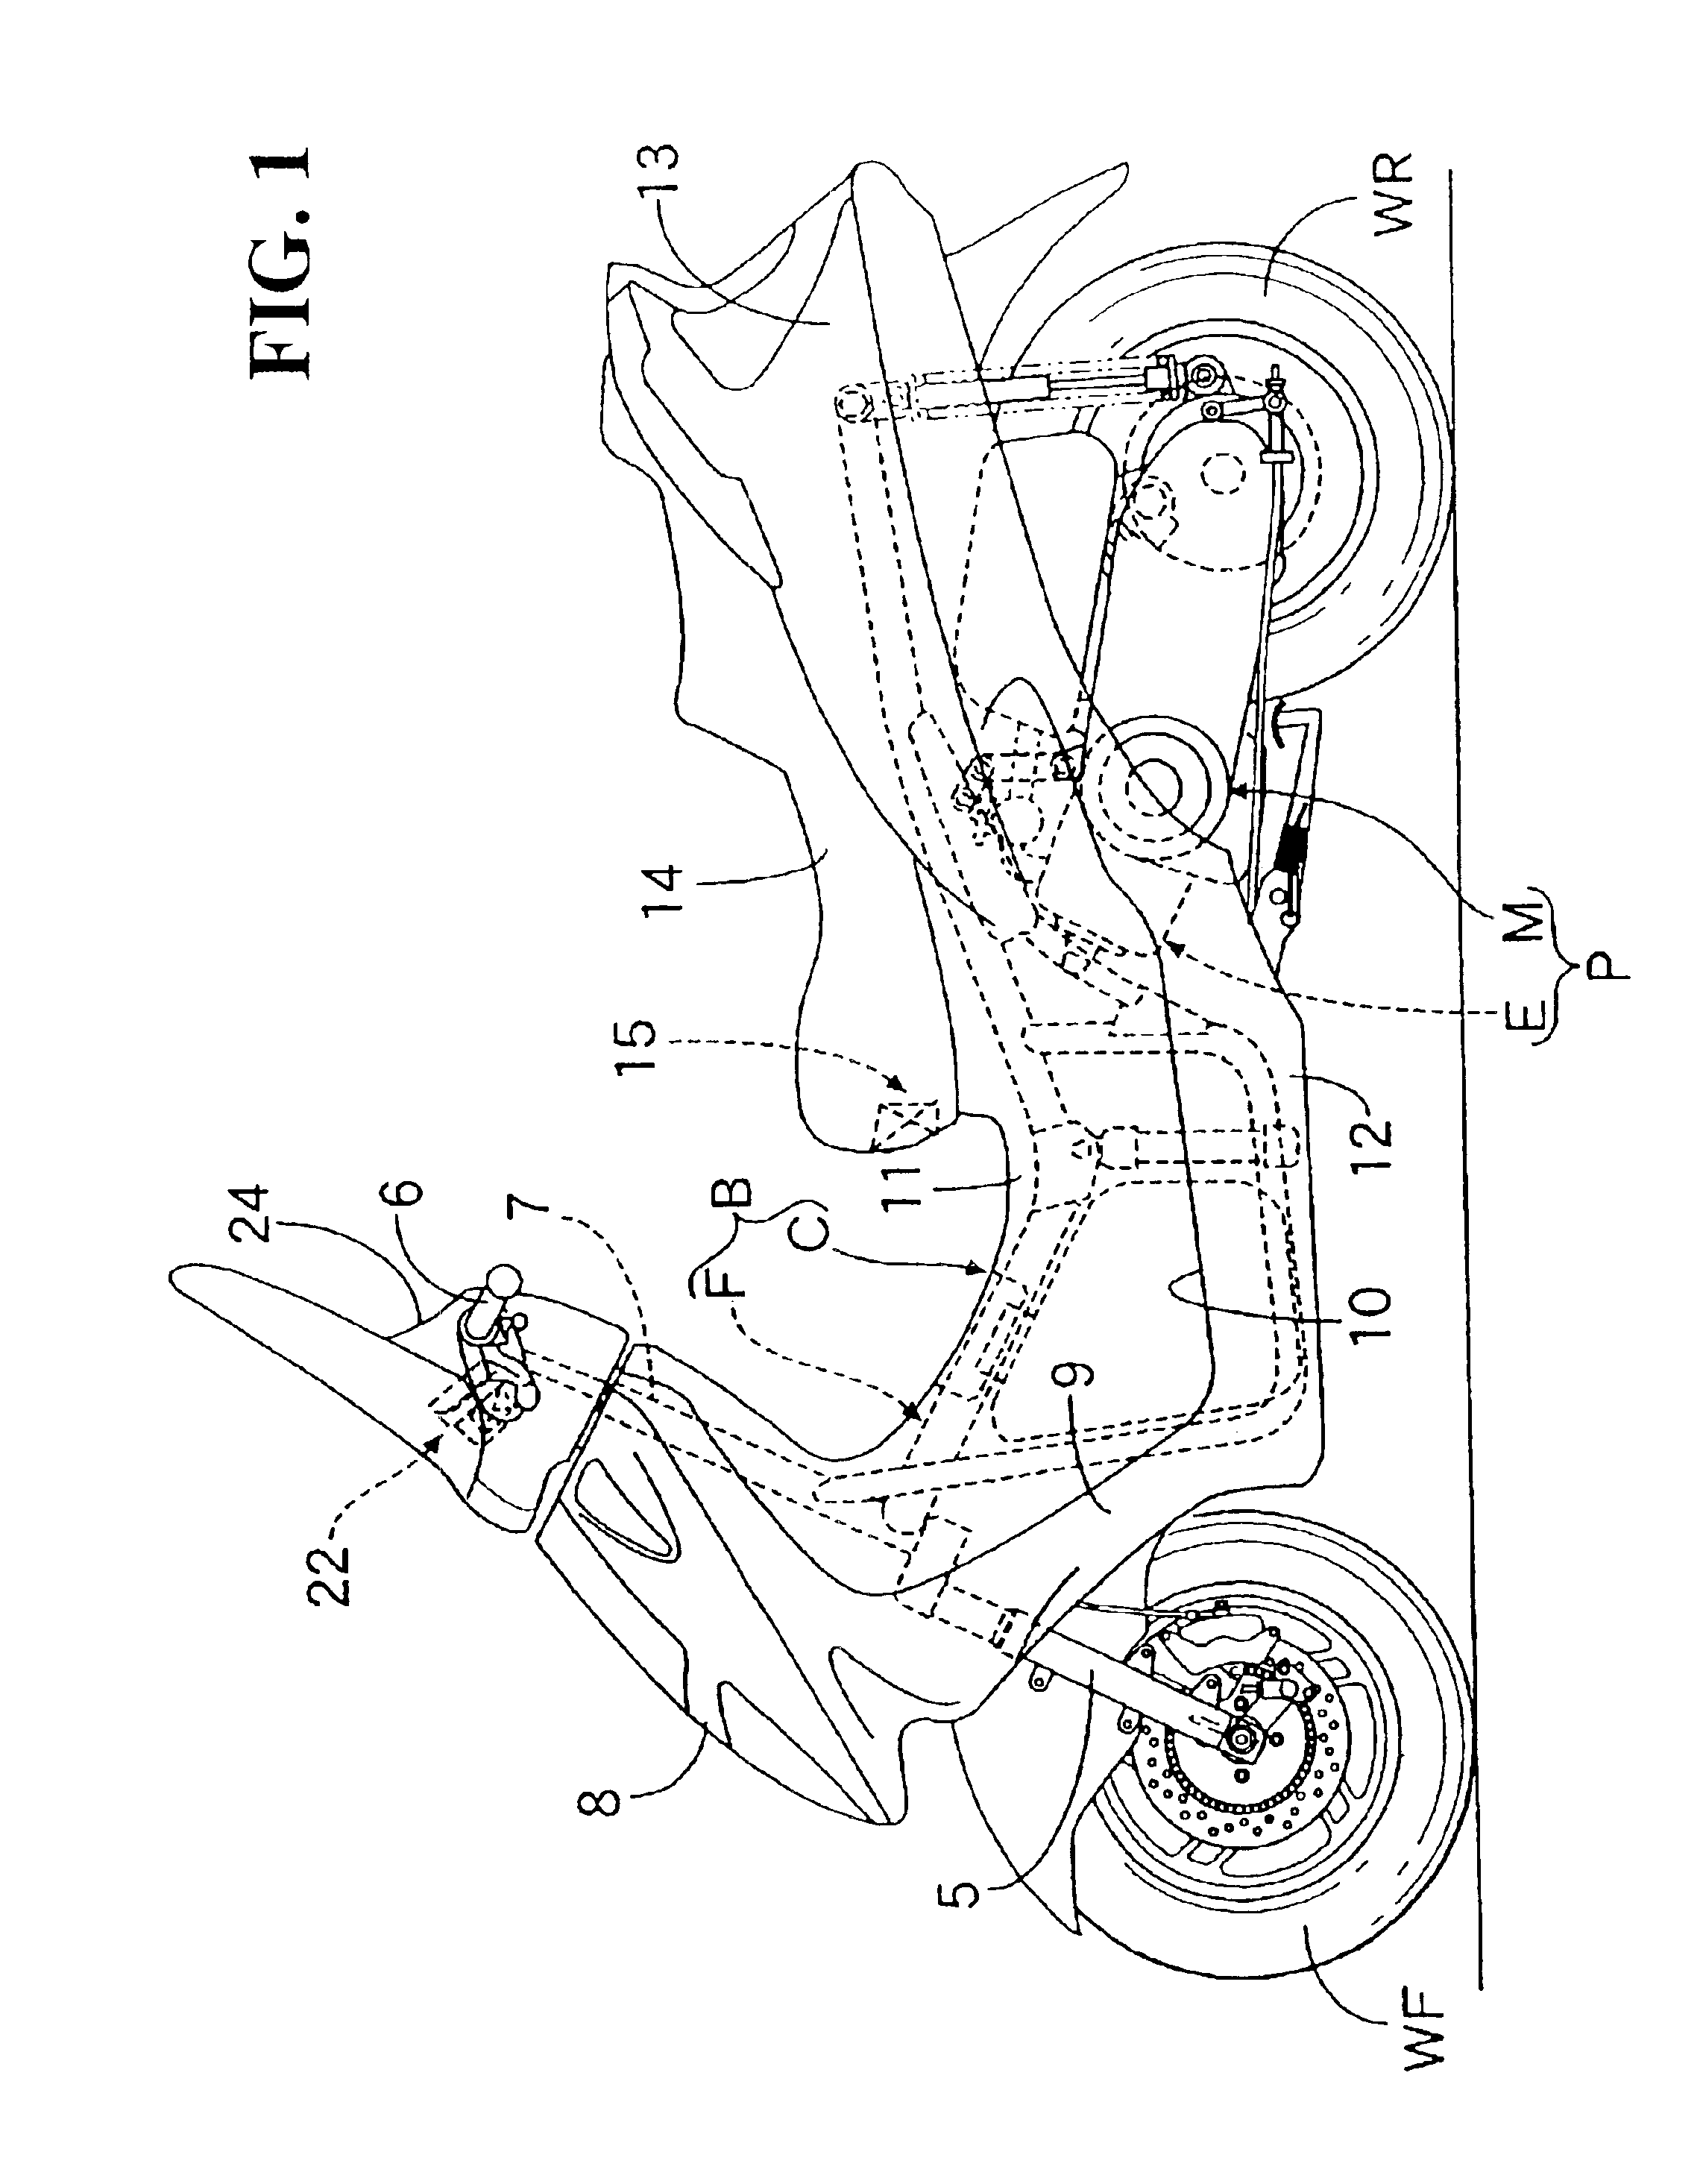 Air bag system in scooter type vehicle